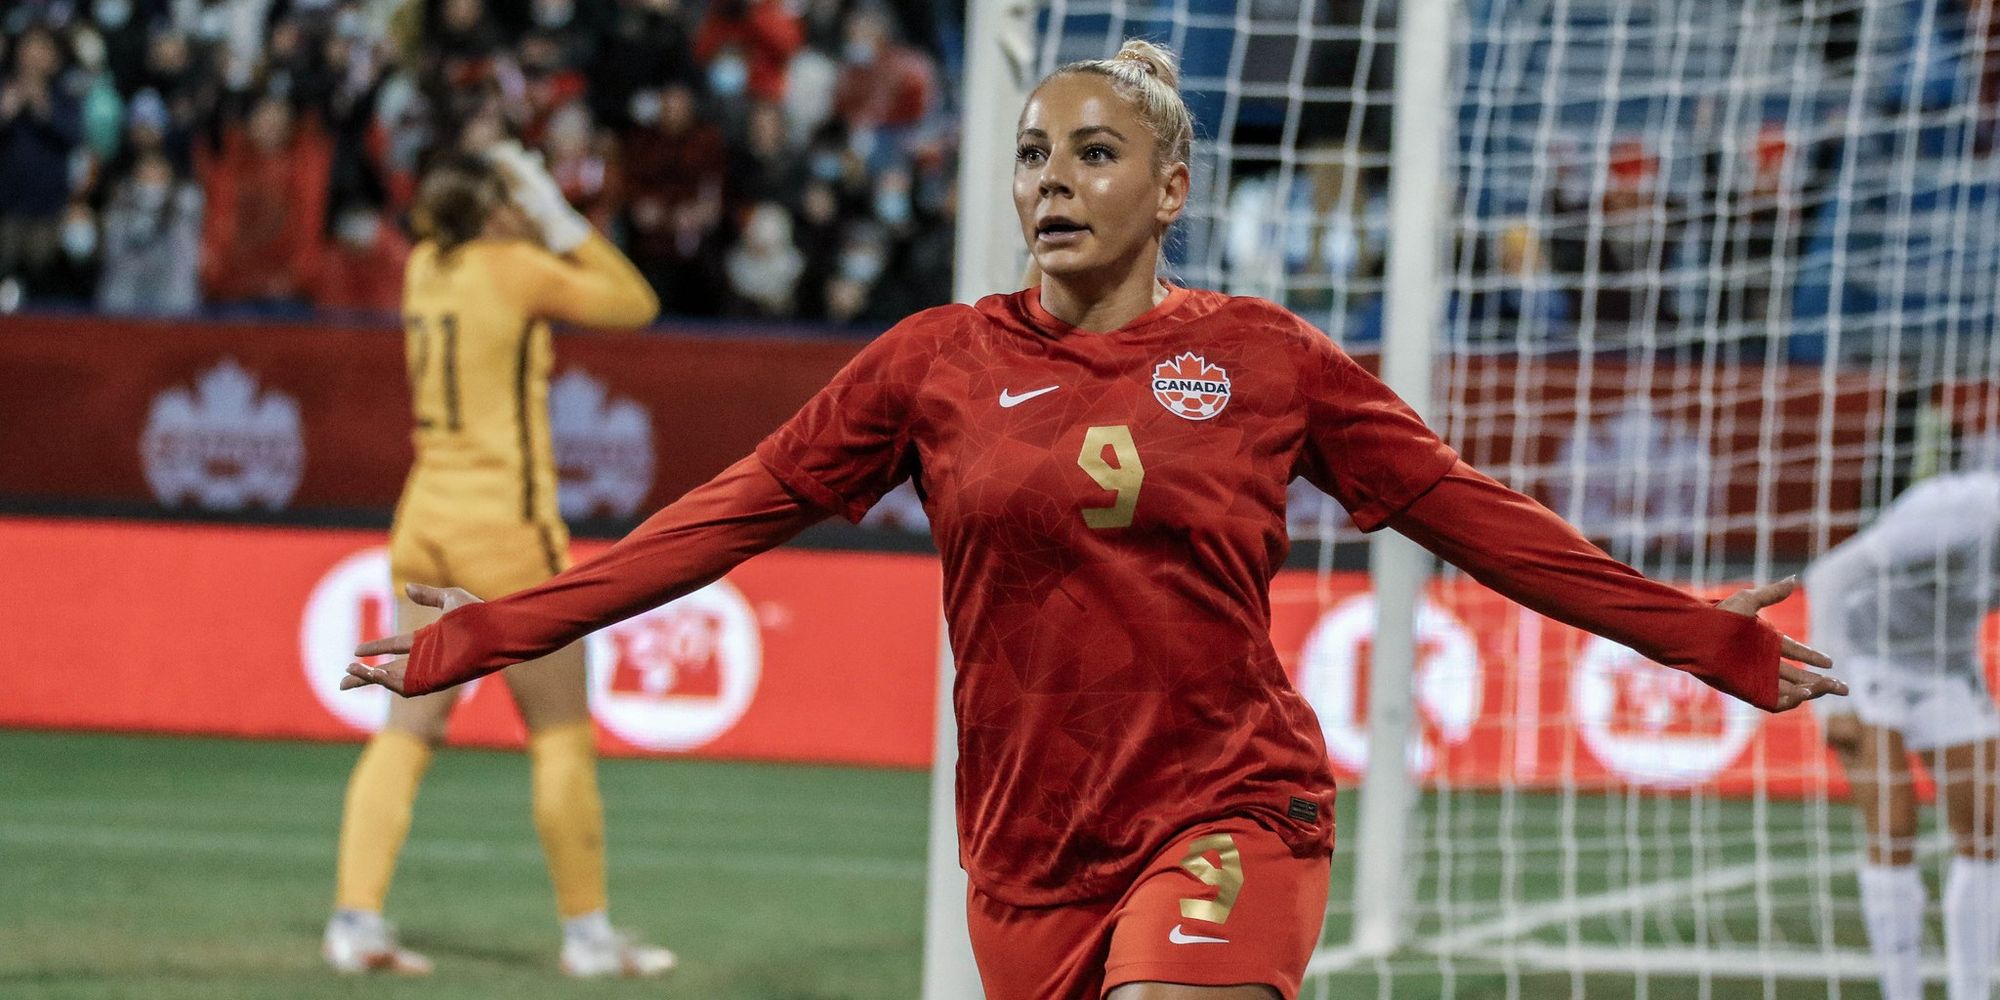 CanWNT Talk: A successful homecoming for Priestman's side